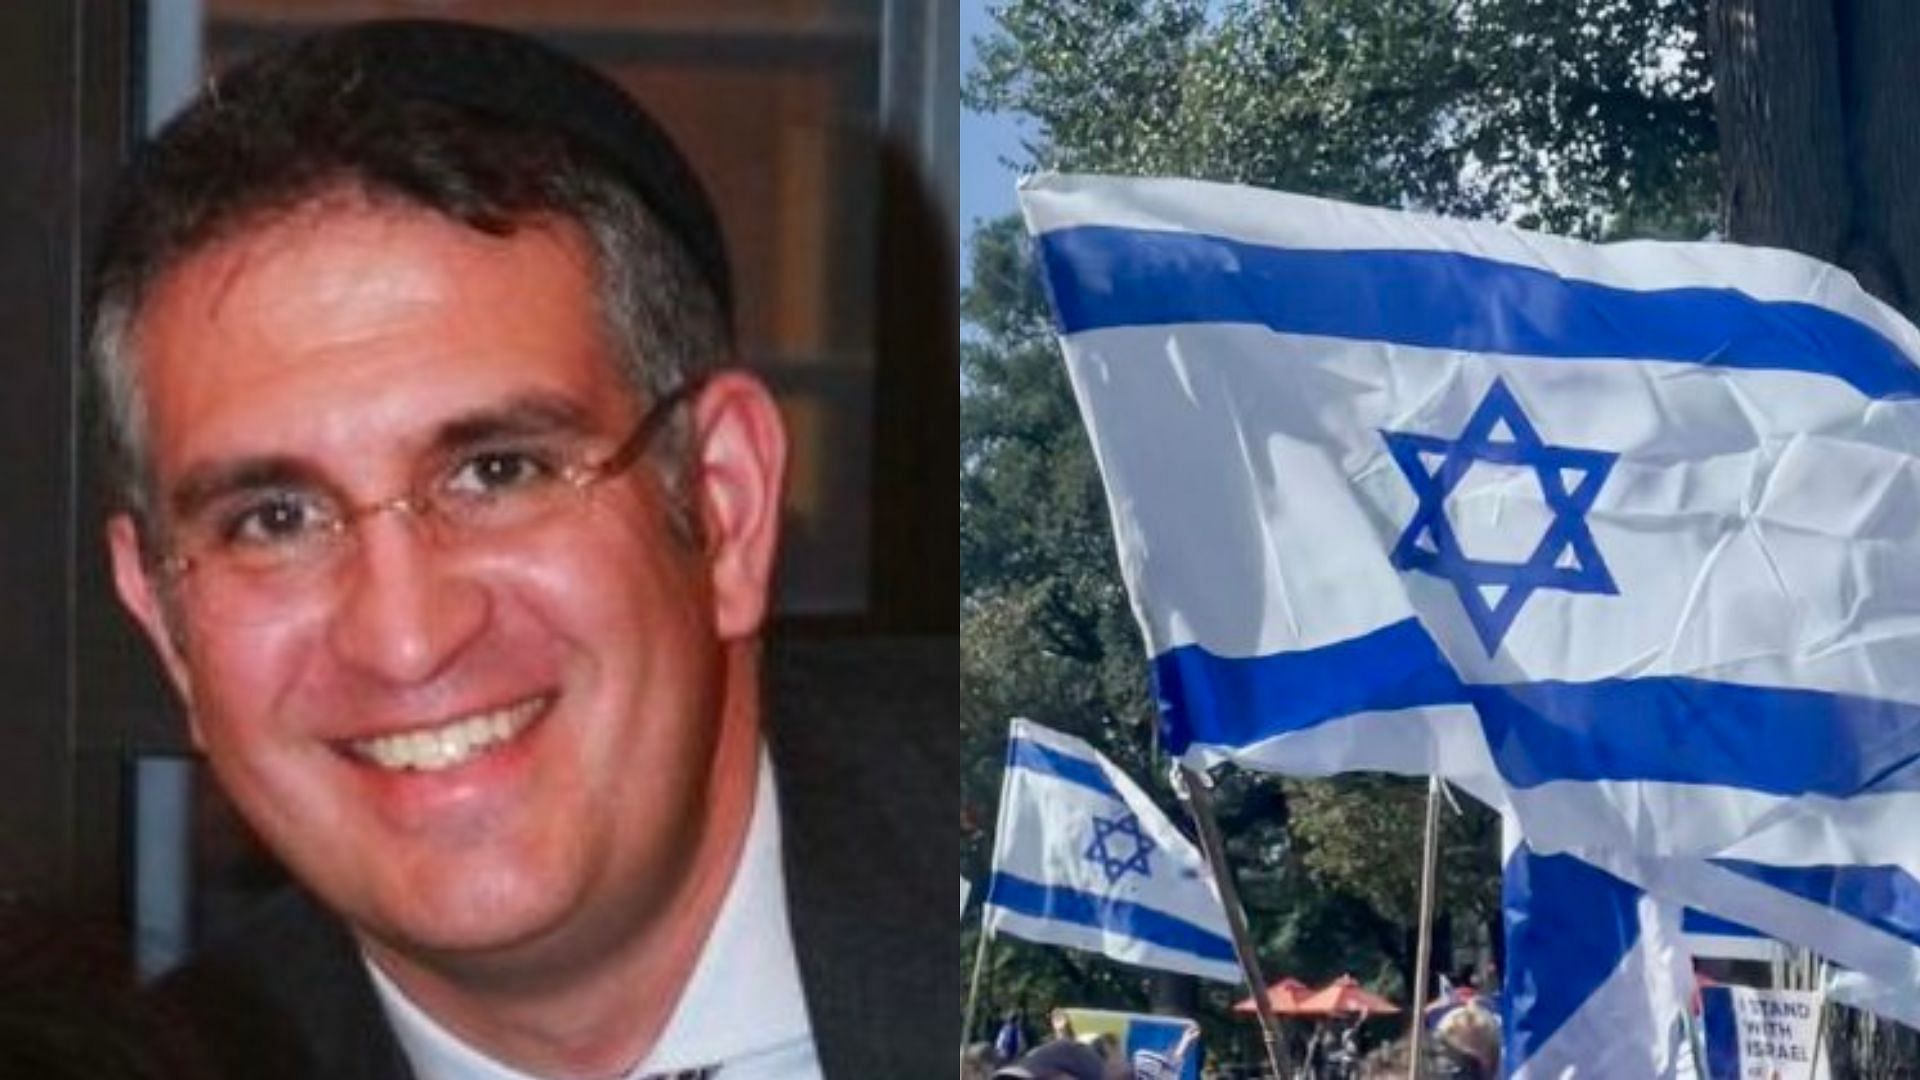 (L) Jonah Steinberg is with the Anti-Defamation League (Images via ADL)